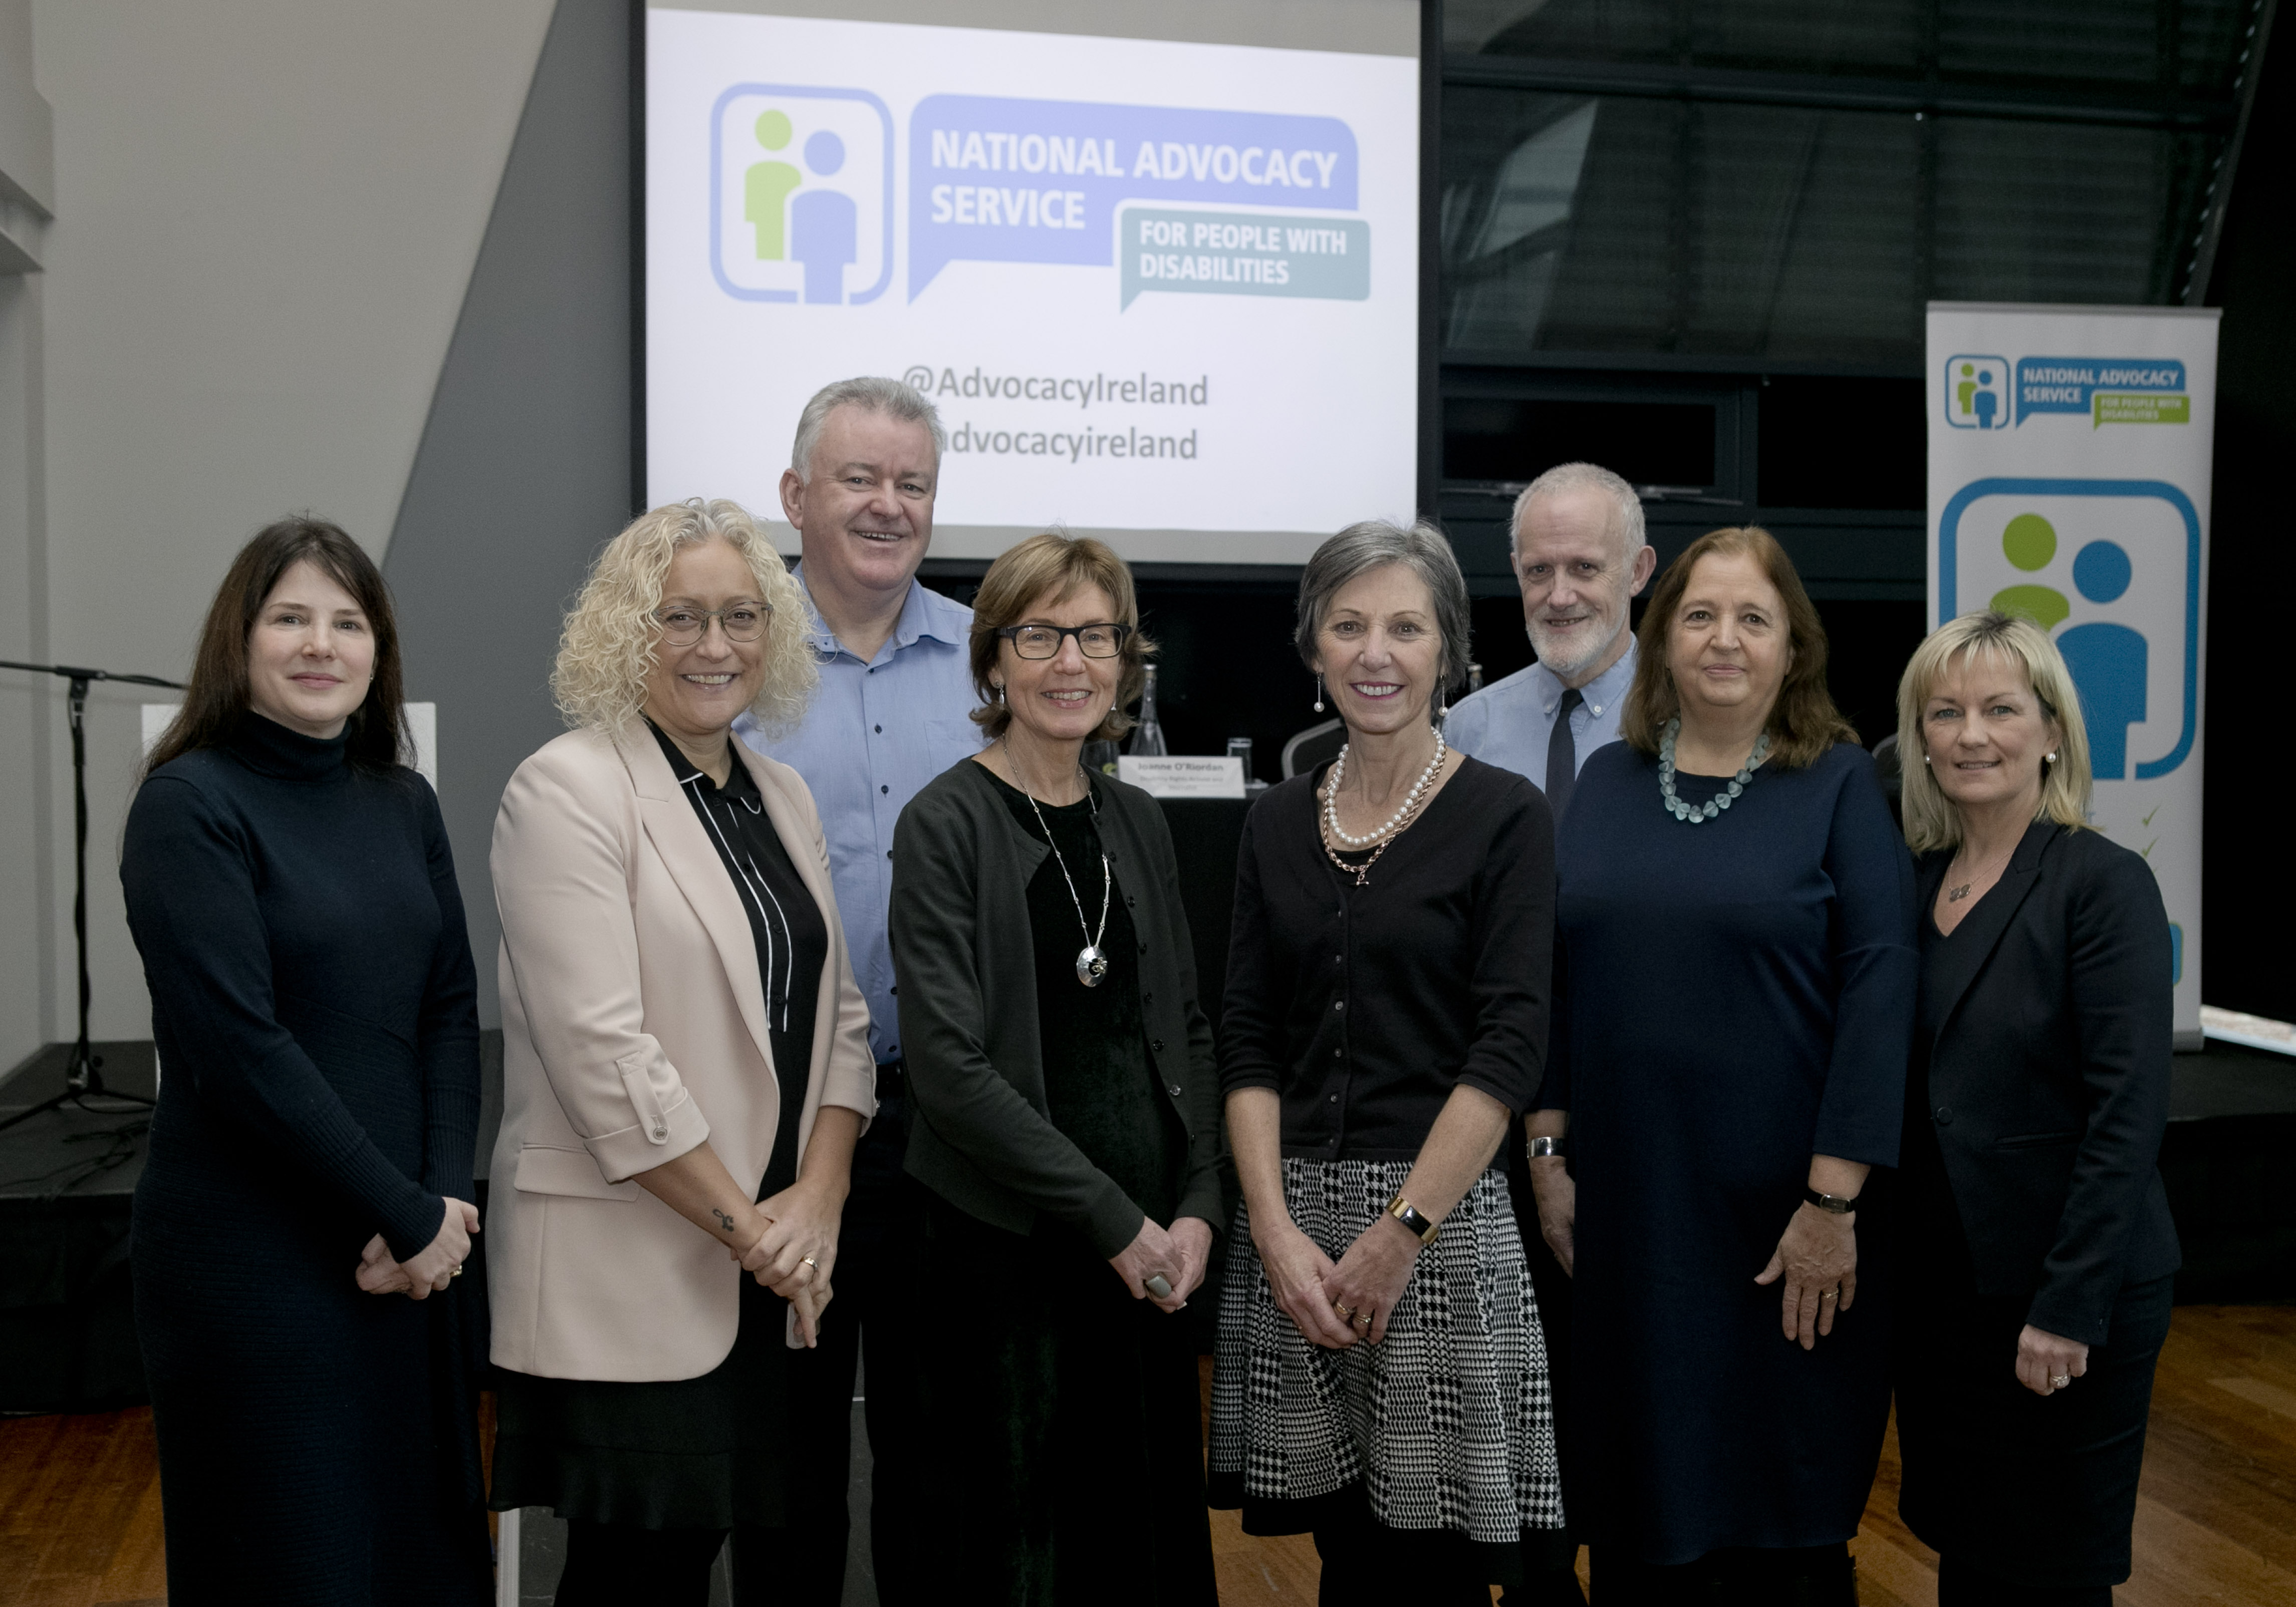 Pictured are NAS Directors from left: Elaine O’Mahoney, Helen McDaid, Diarmaid Ó Corrbuí, Nuala Doherty (Chairperson) Brege McCarrick, Noel Beecher, Liz Chaloner, Michelle Tait